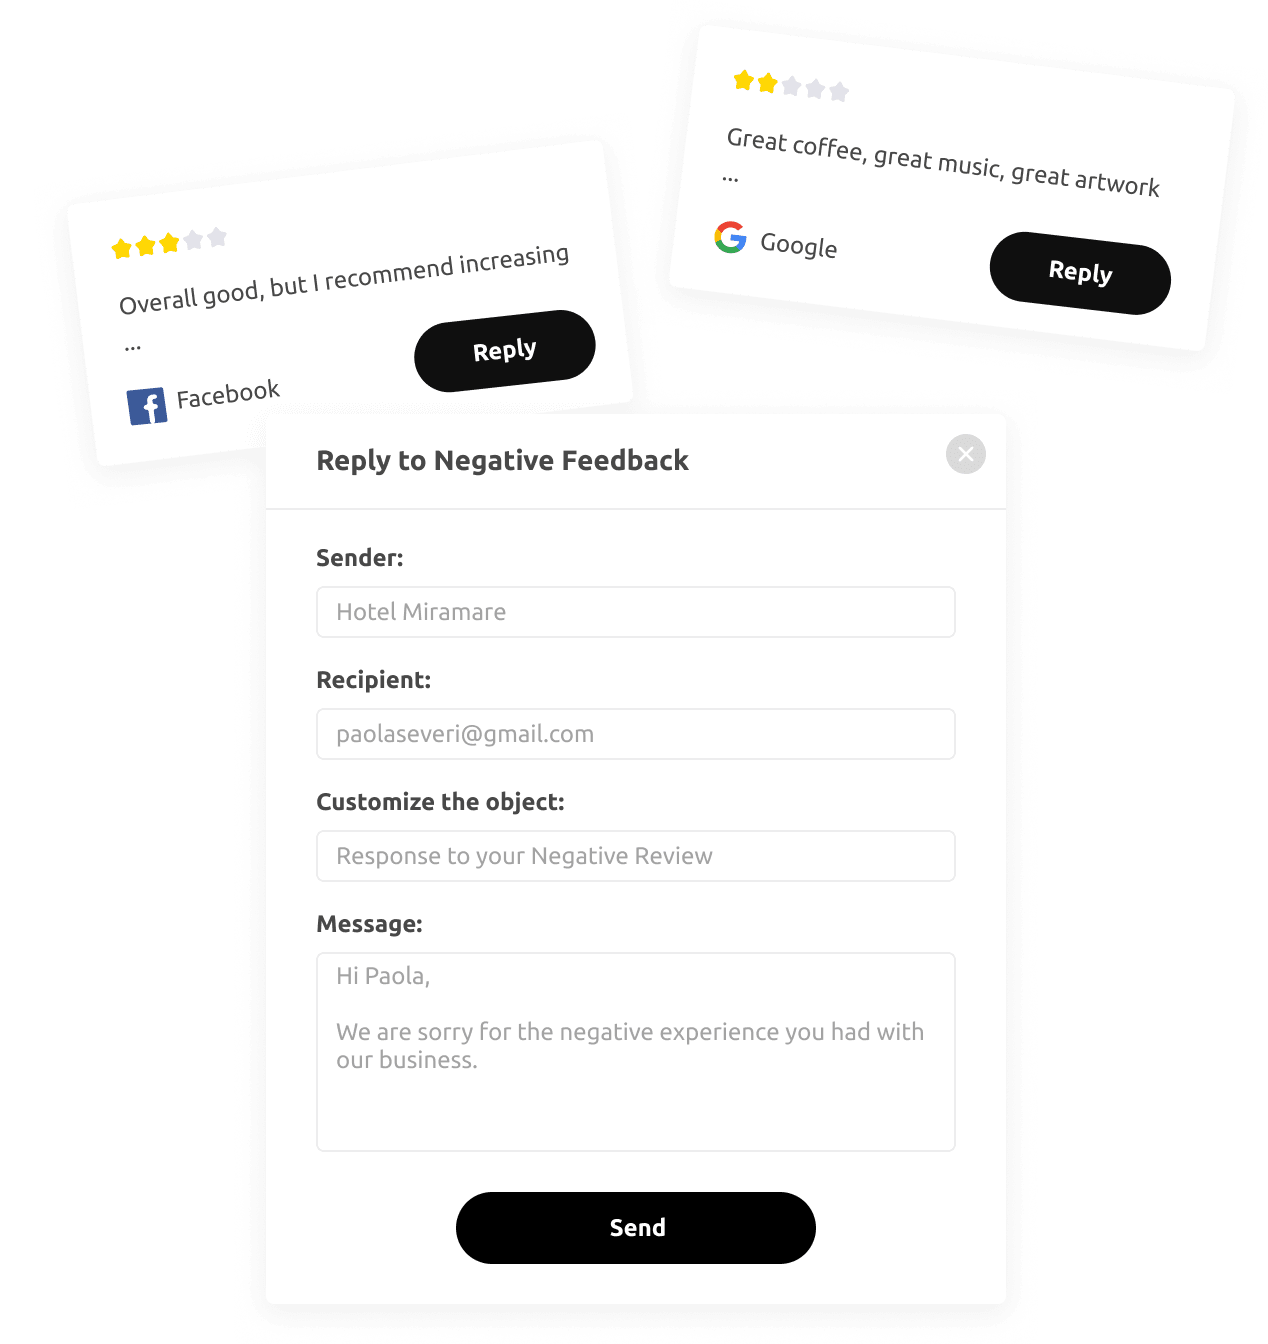 A set of cards designed for managing reputation and improving online feedback, including keywords related to reputation management software and Google review.